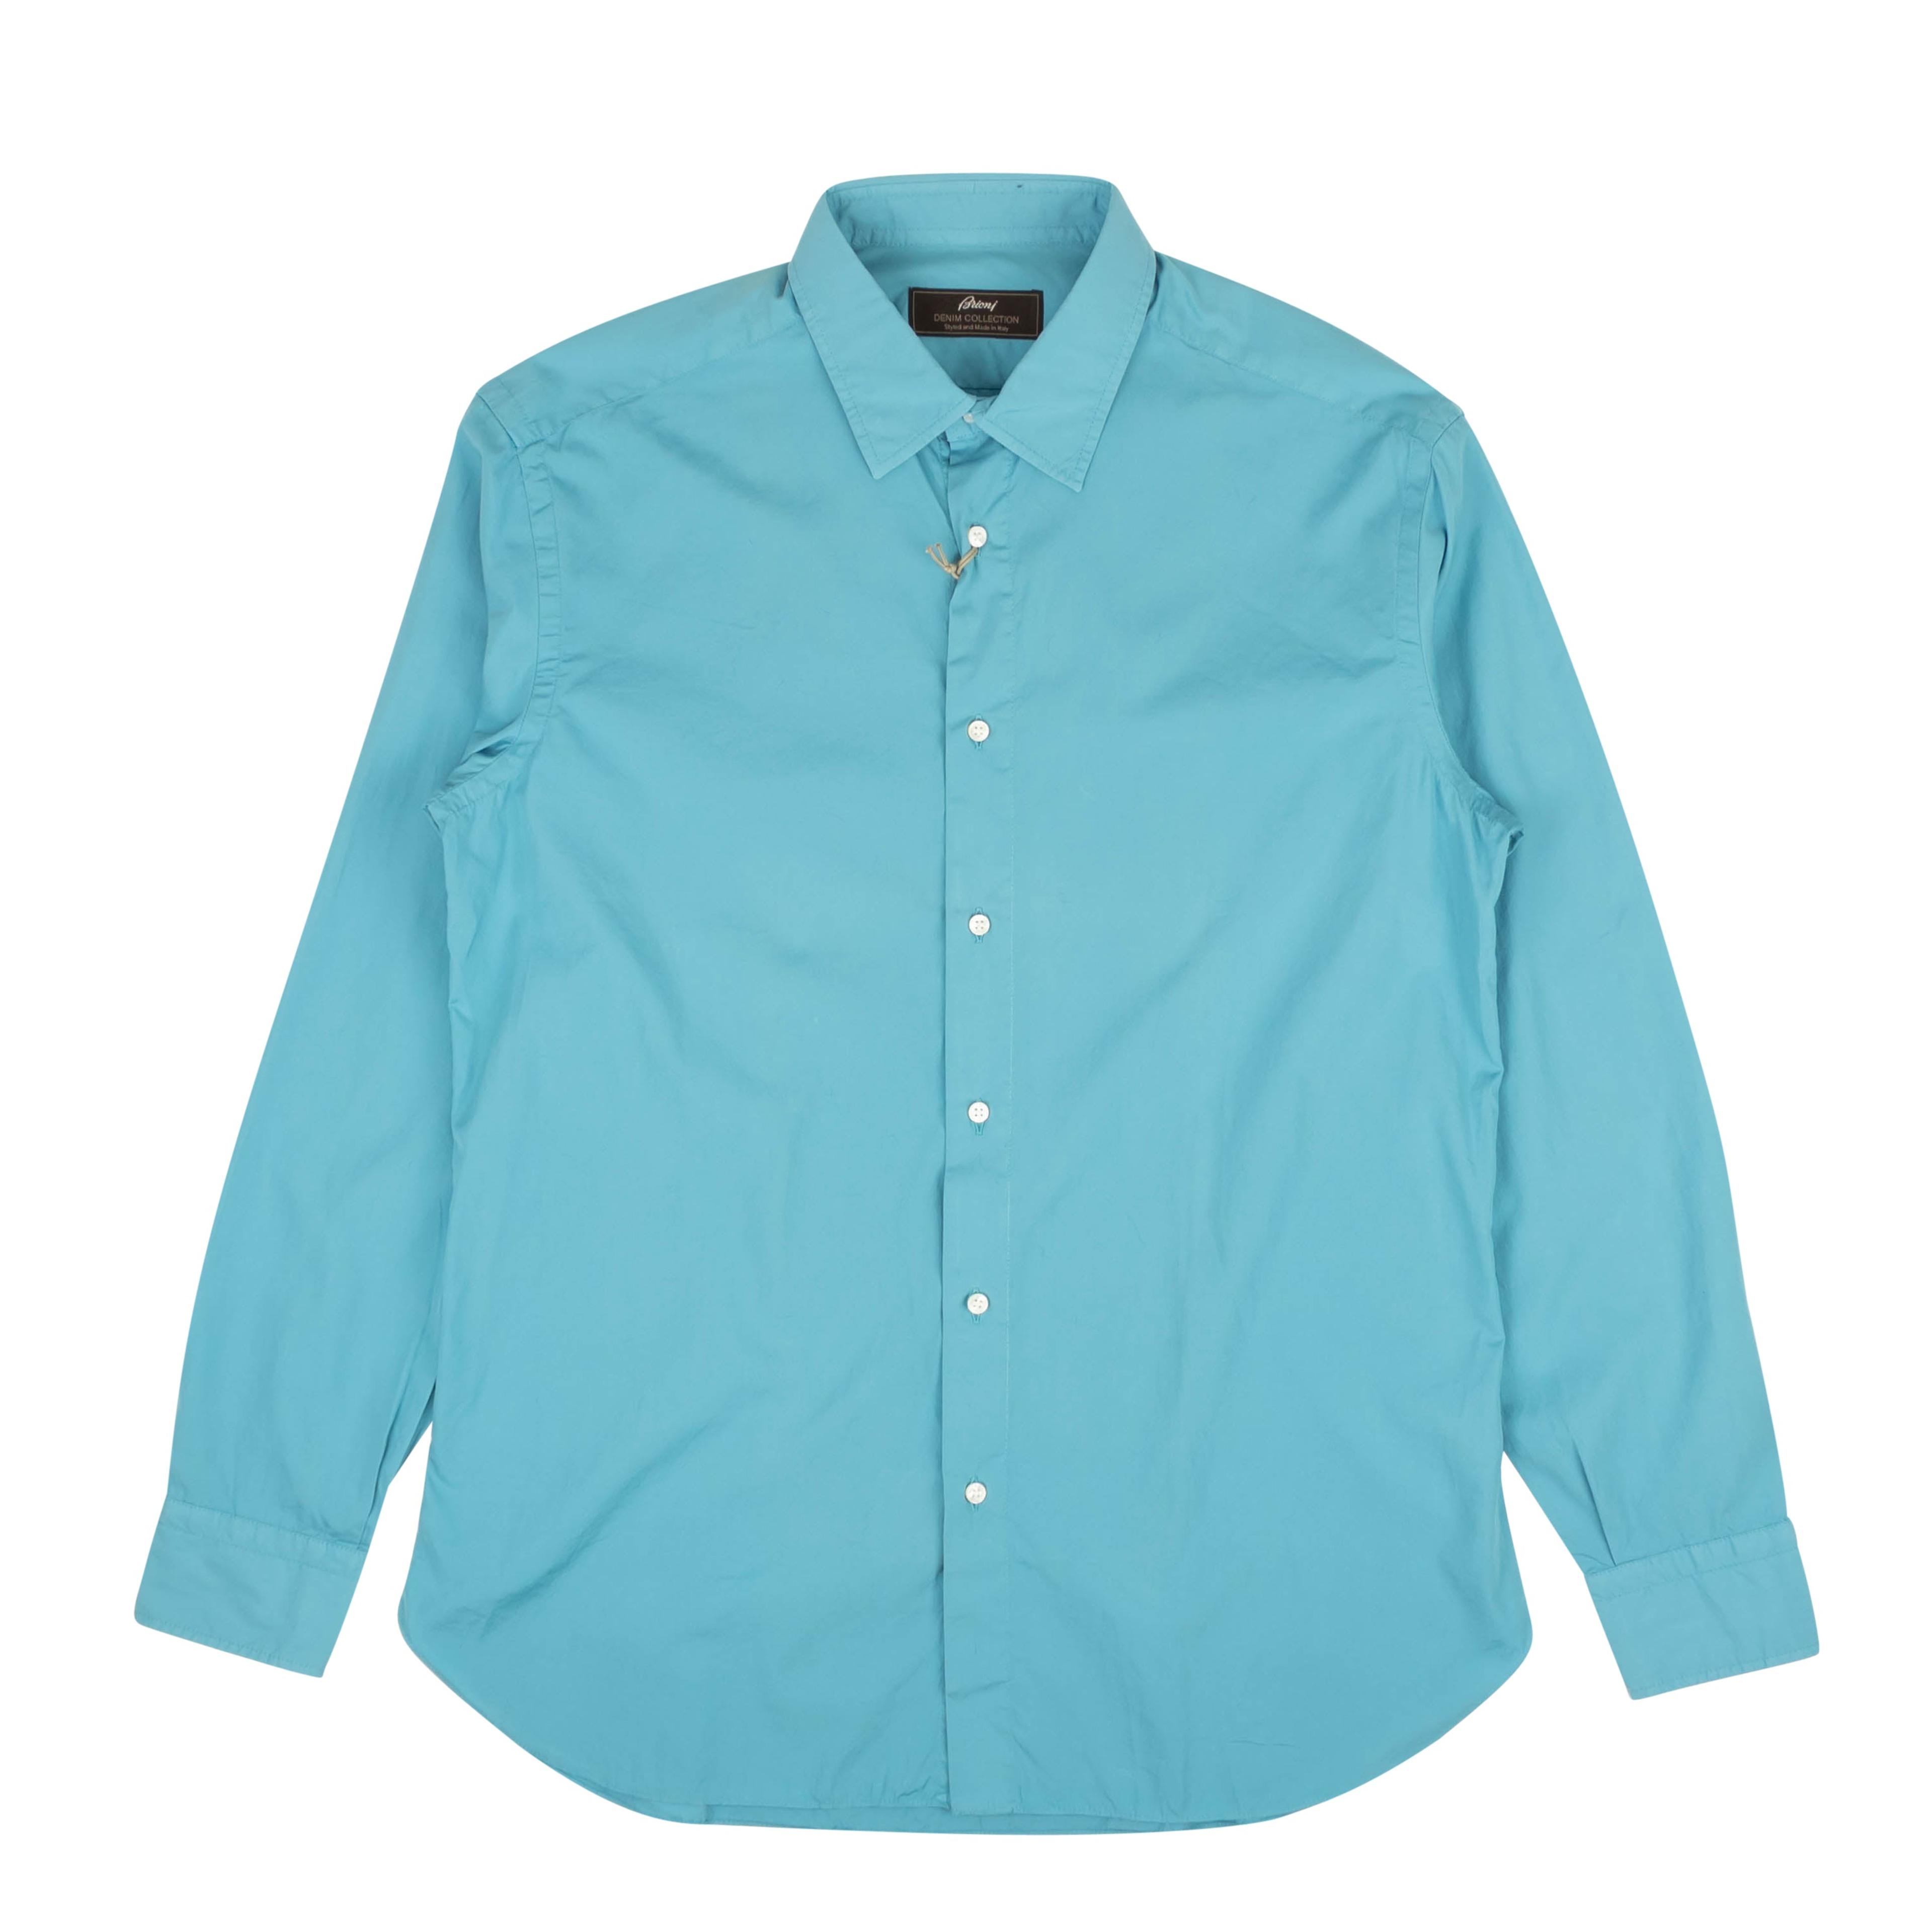 Teal Blue Slim-Fit Long Sleeve Cotton Casual Shirt